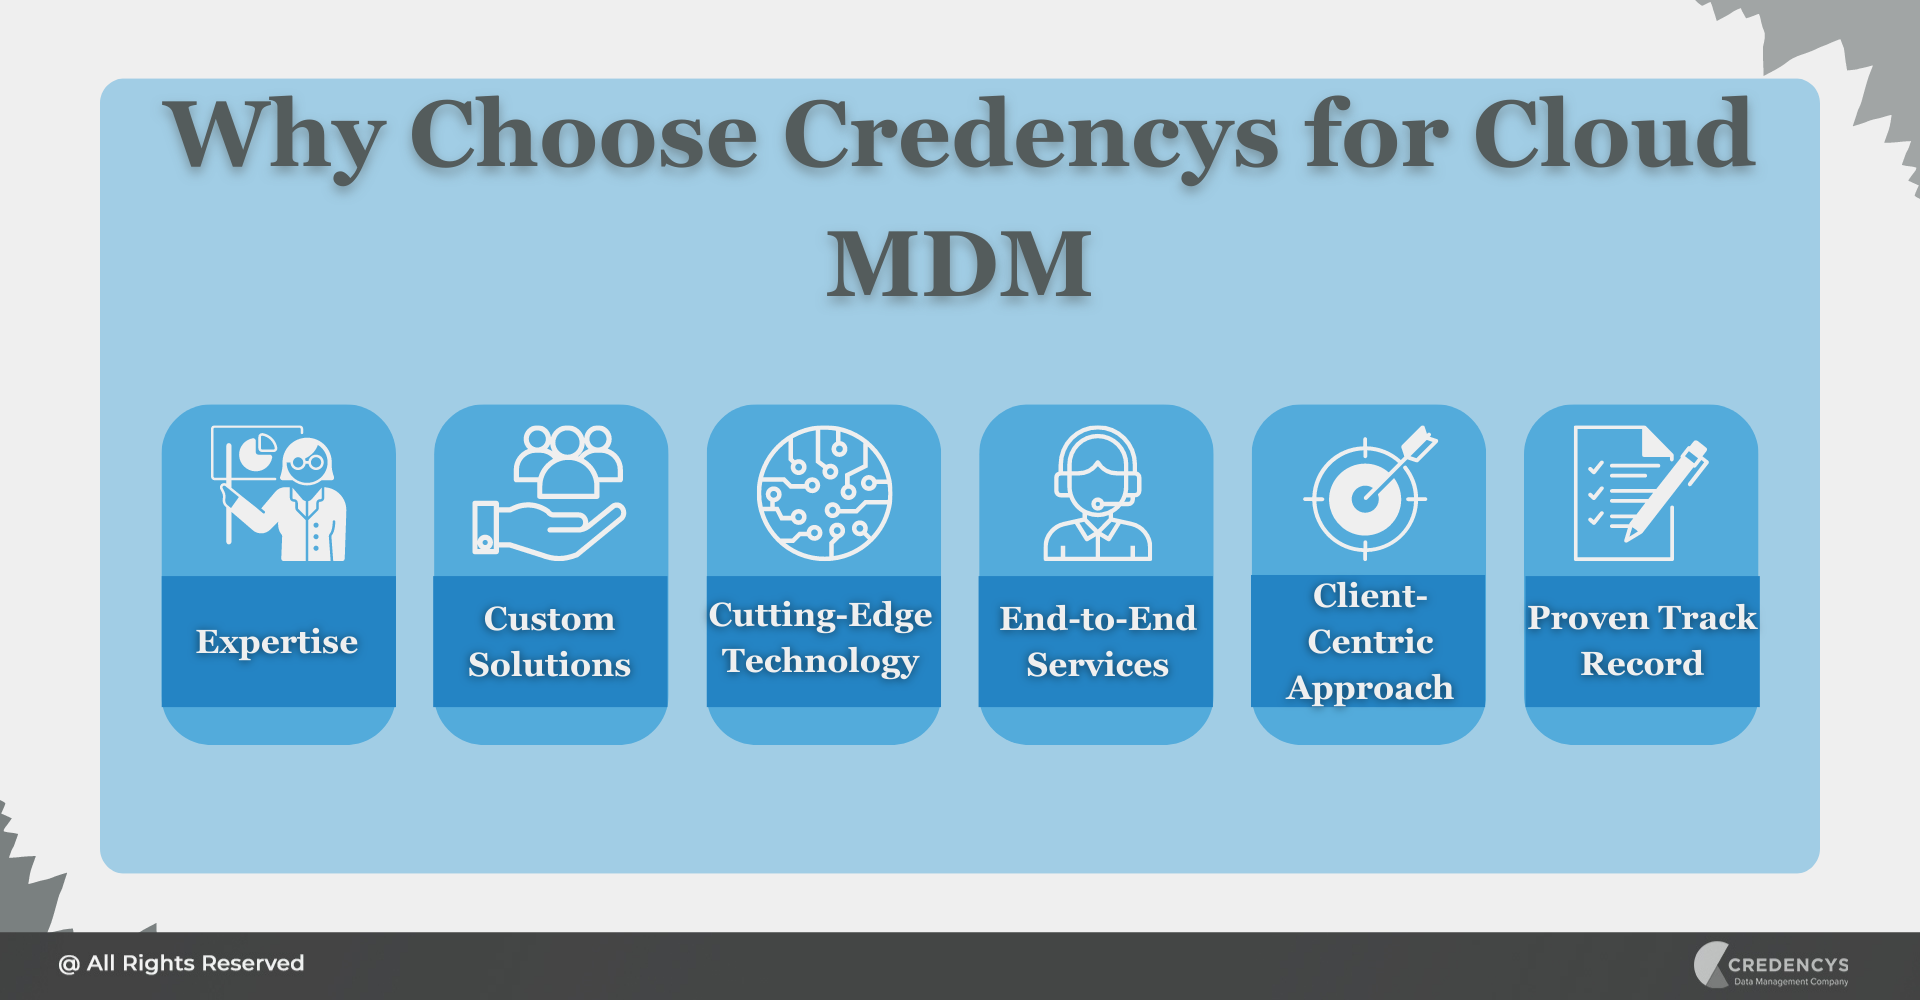 Why Choose Credencys for Cloud MDM